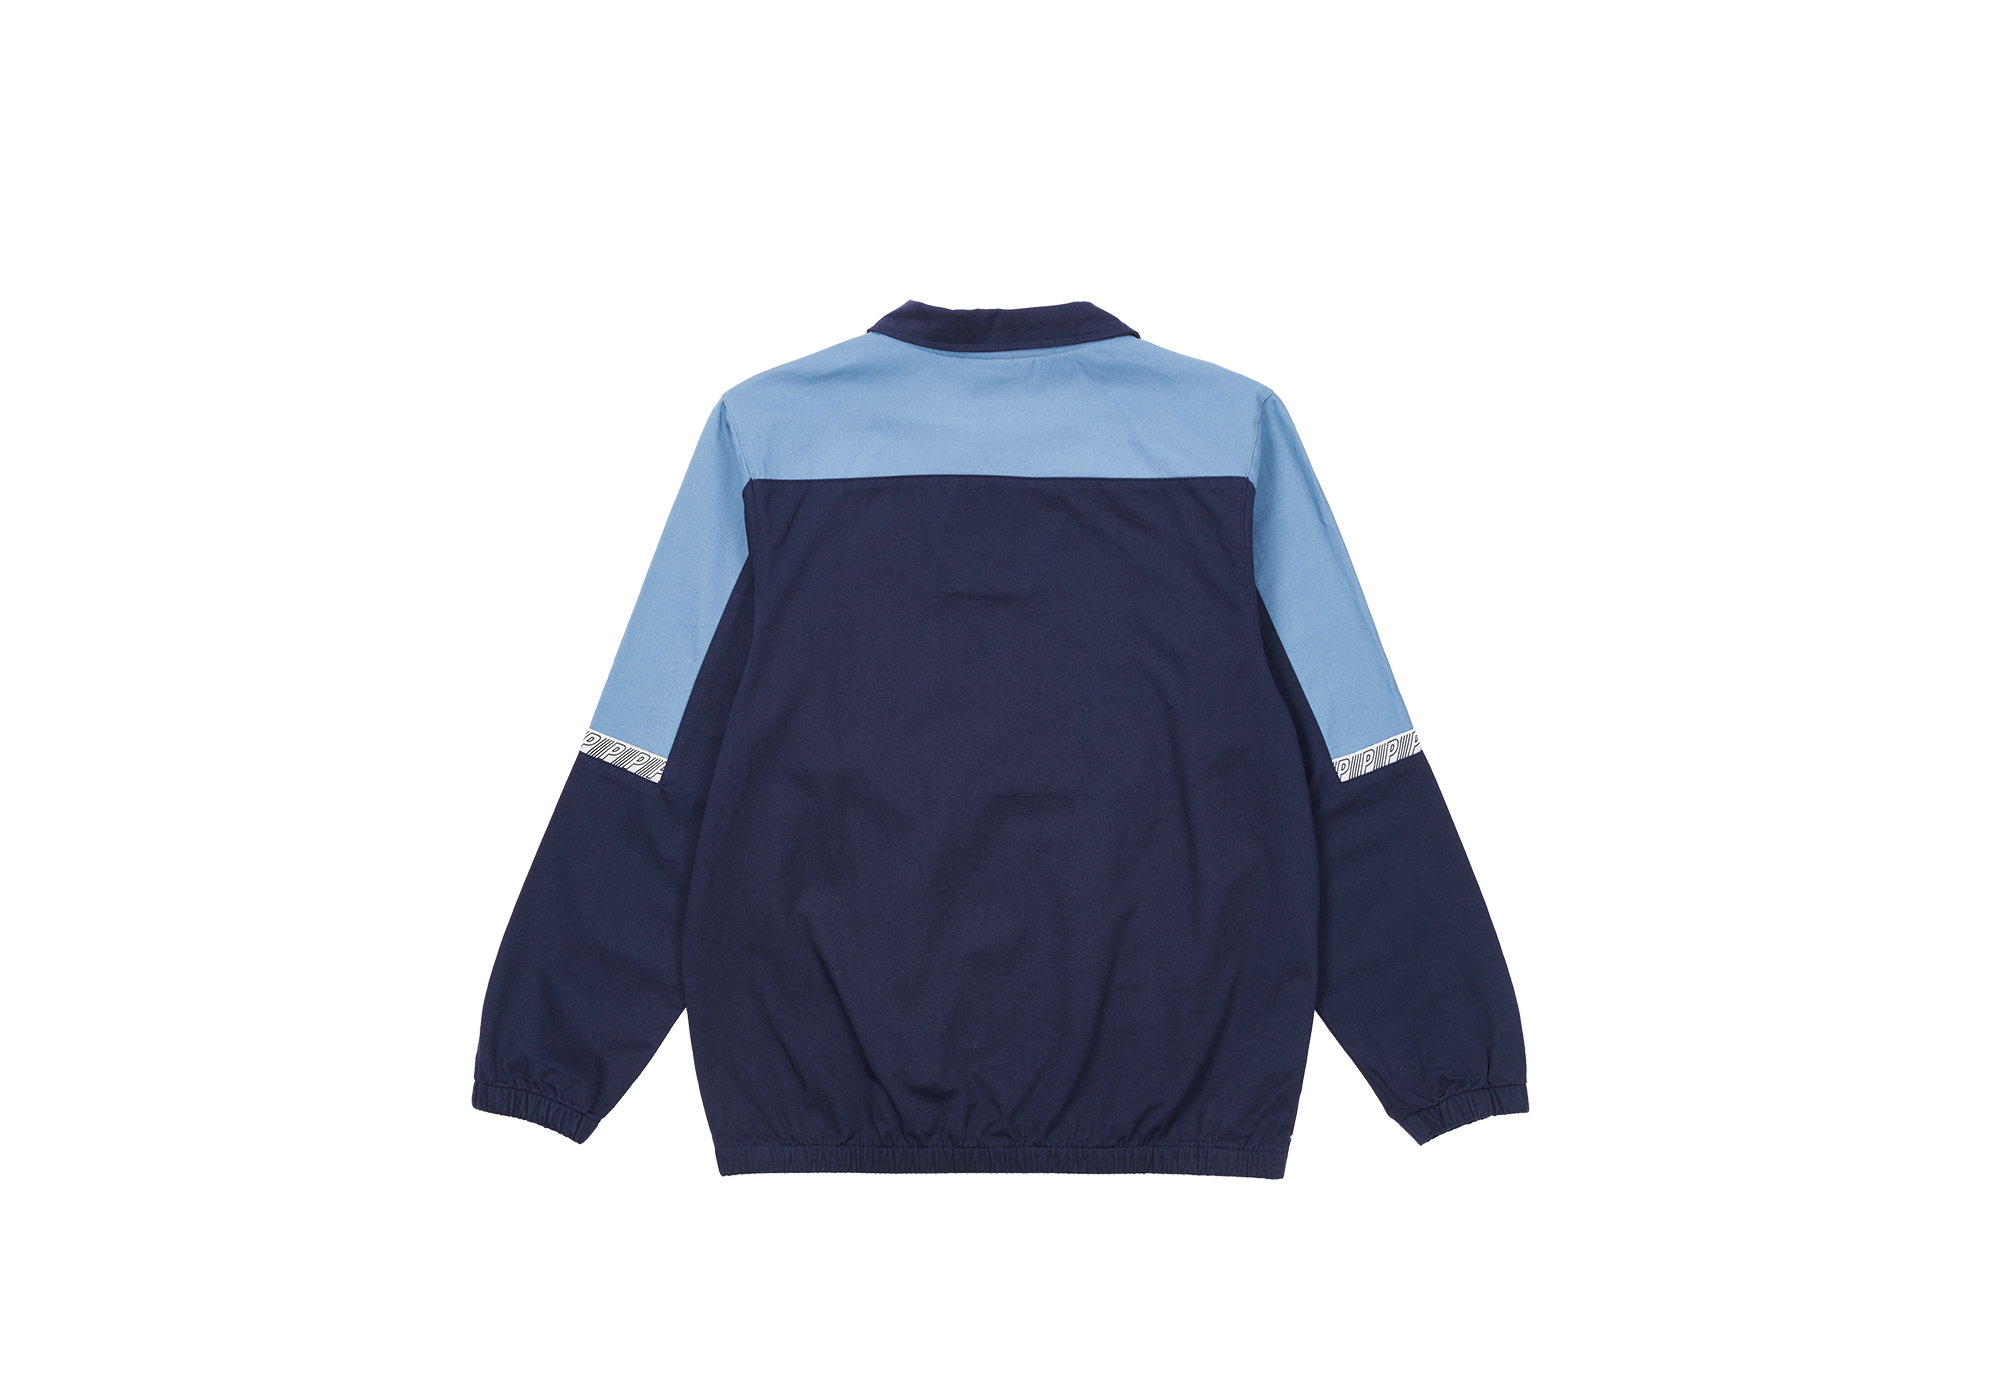 Palace x Umbro 2022 Collection - Football Shirt Culture - Latest ...